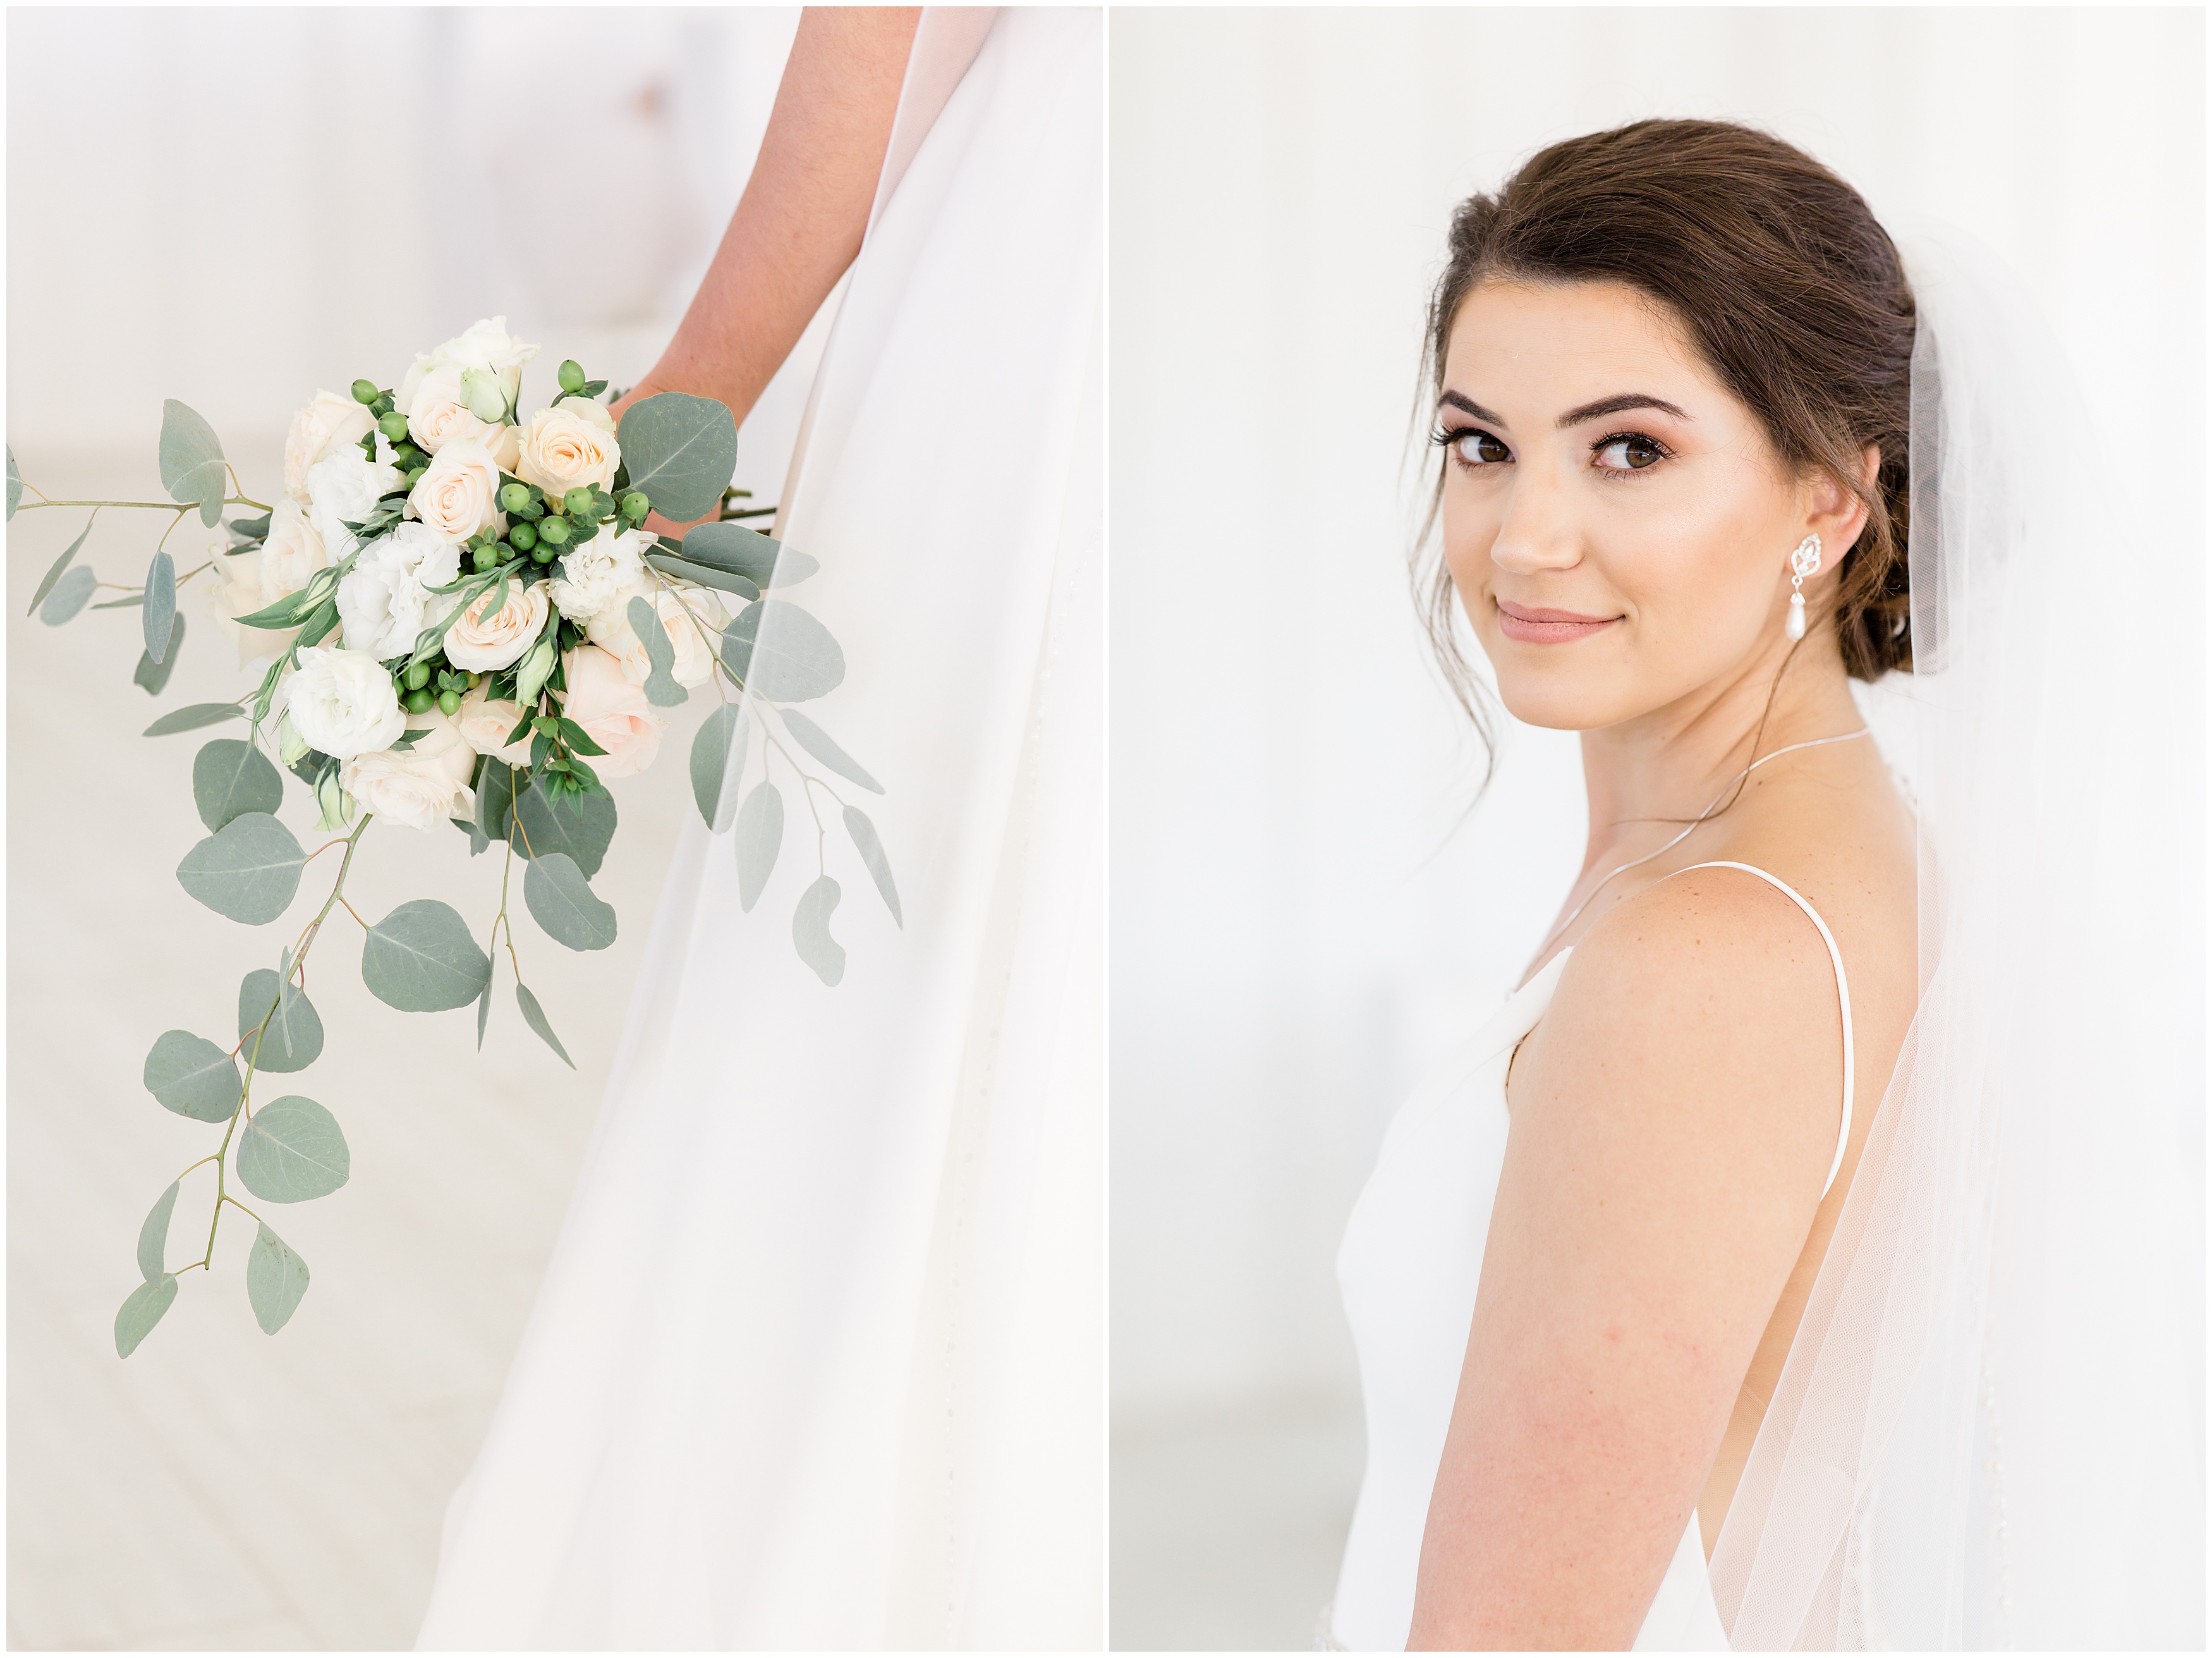 A gorgeous fall bridal session at The Grand Ivory by photographer Courtney Bosworth